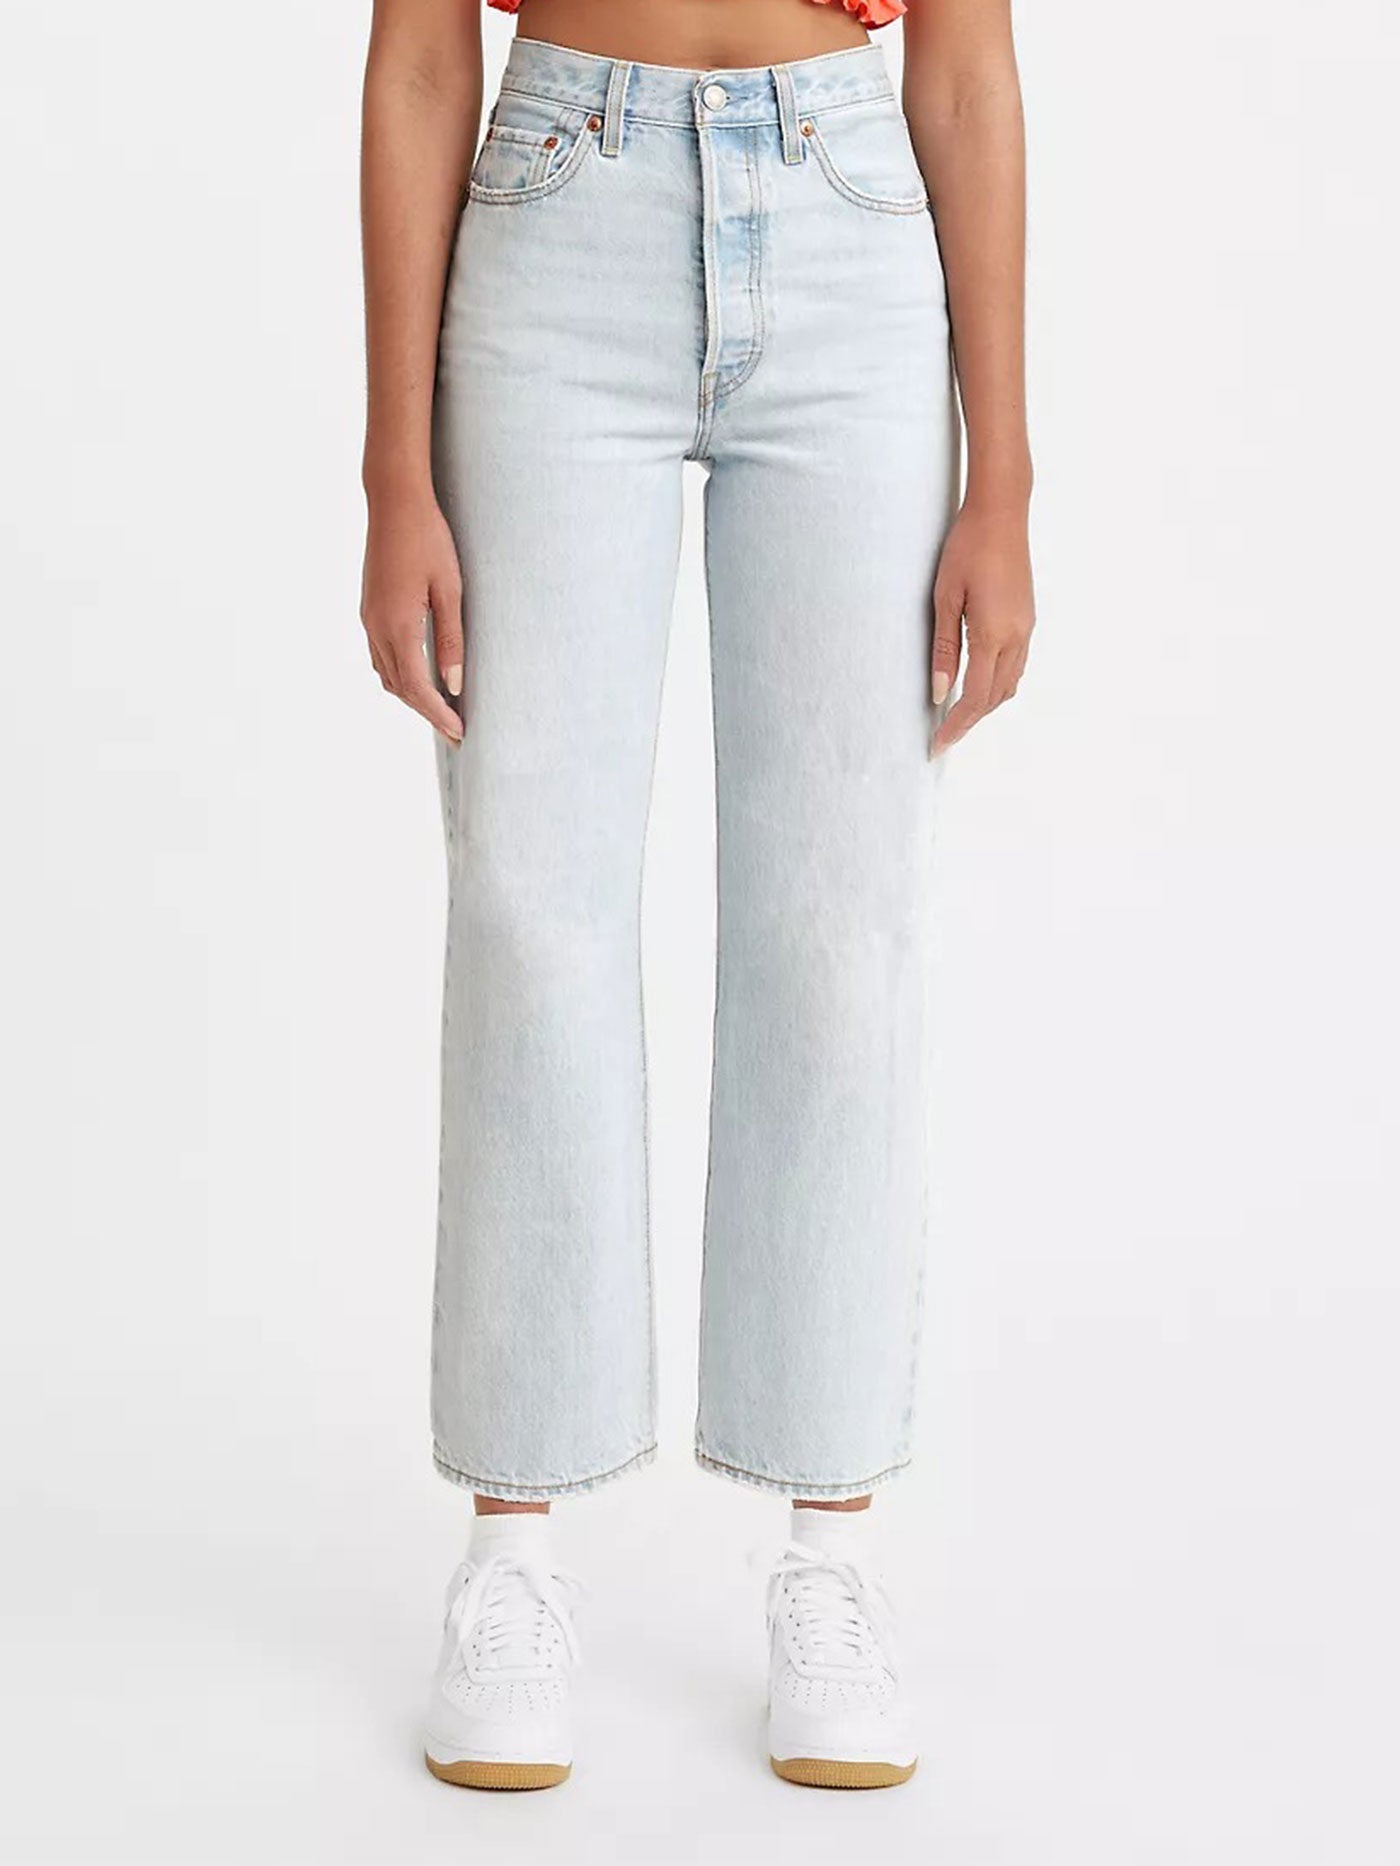 Levis Ribcage Straight Ankle Ojai Shore Jeans | EMPIRE